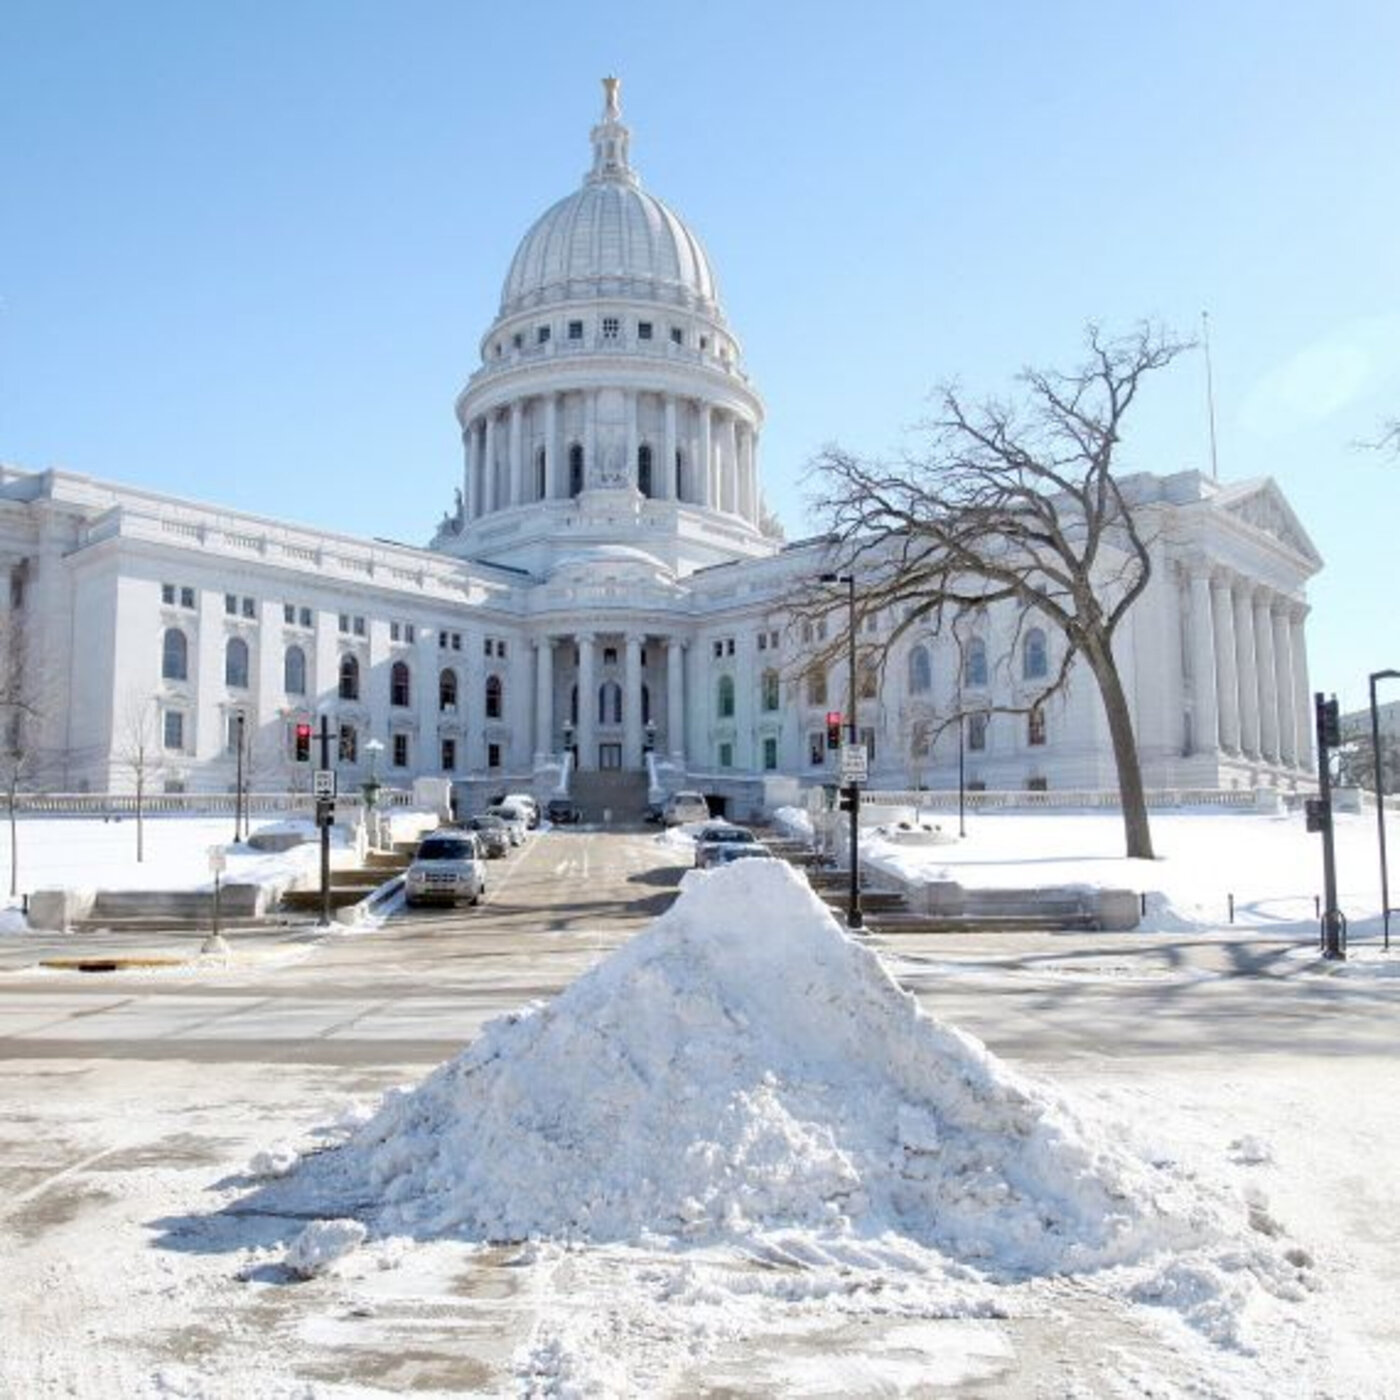 Wisconsin's coldest politicians and policies